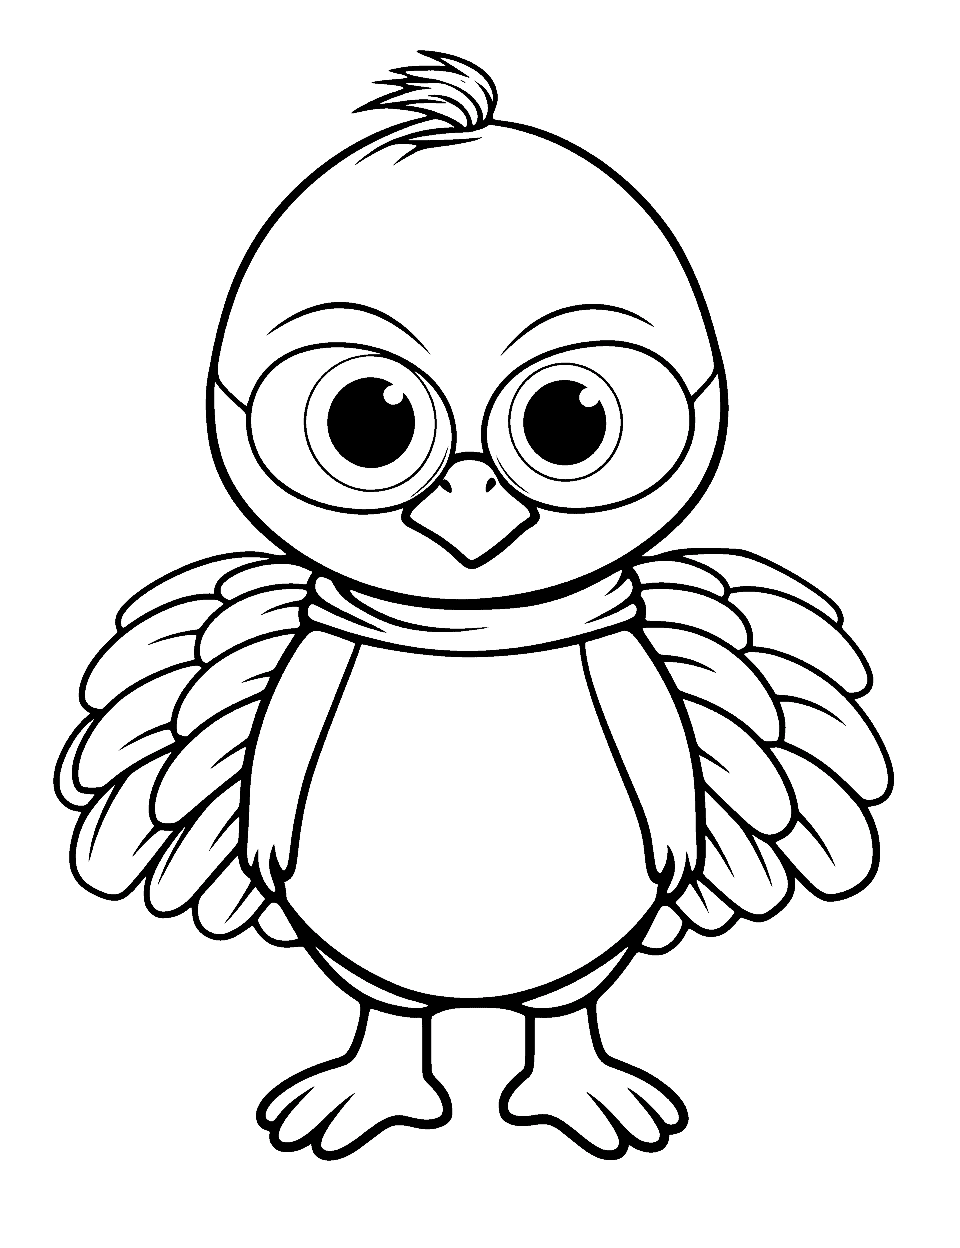 Cute Baby Turkey in Disguise Coloring Page - An adorable baby turkey wearing glasses and a scarf.